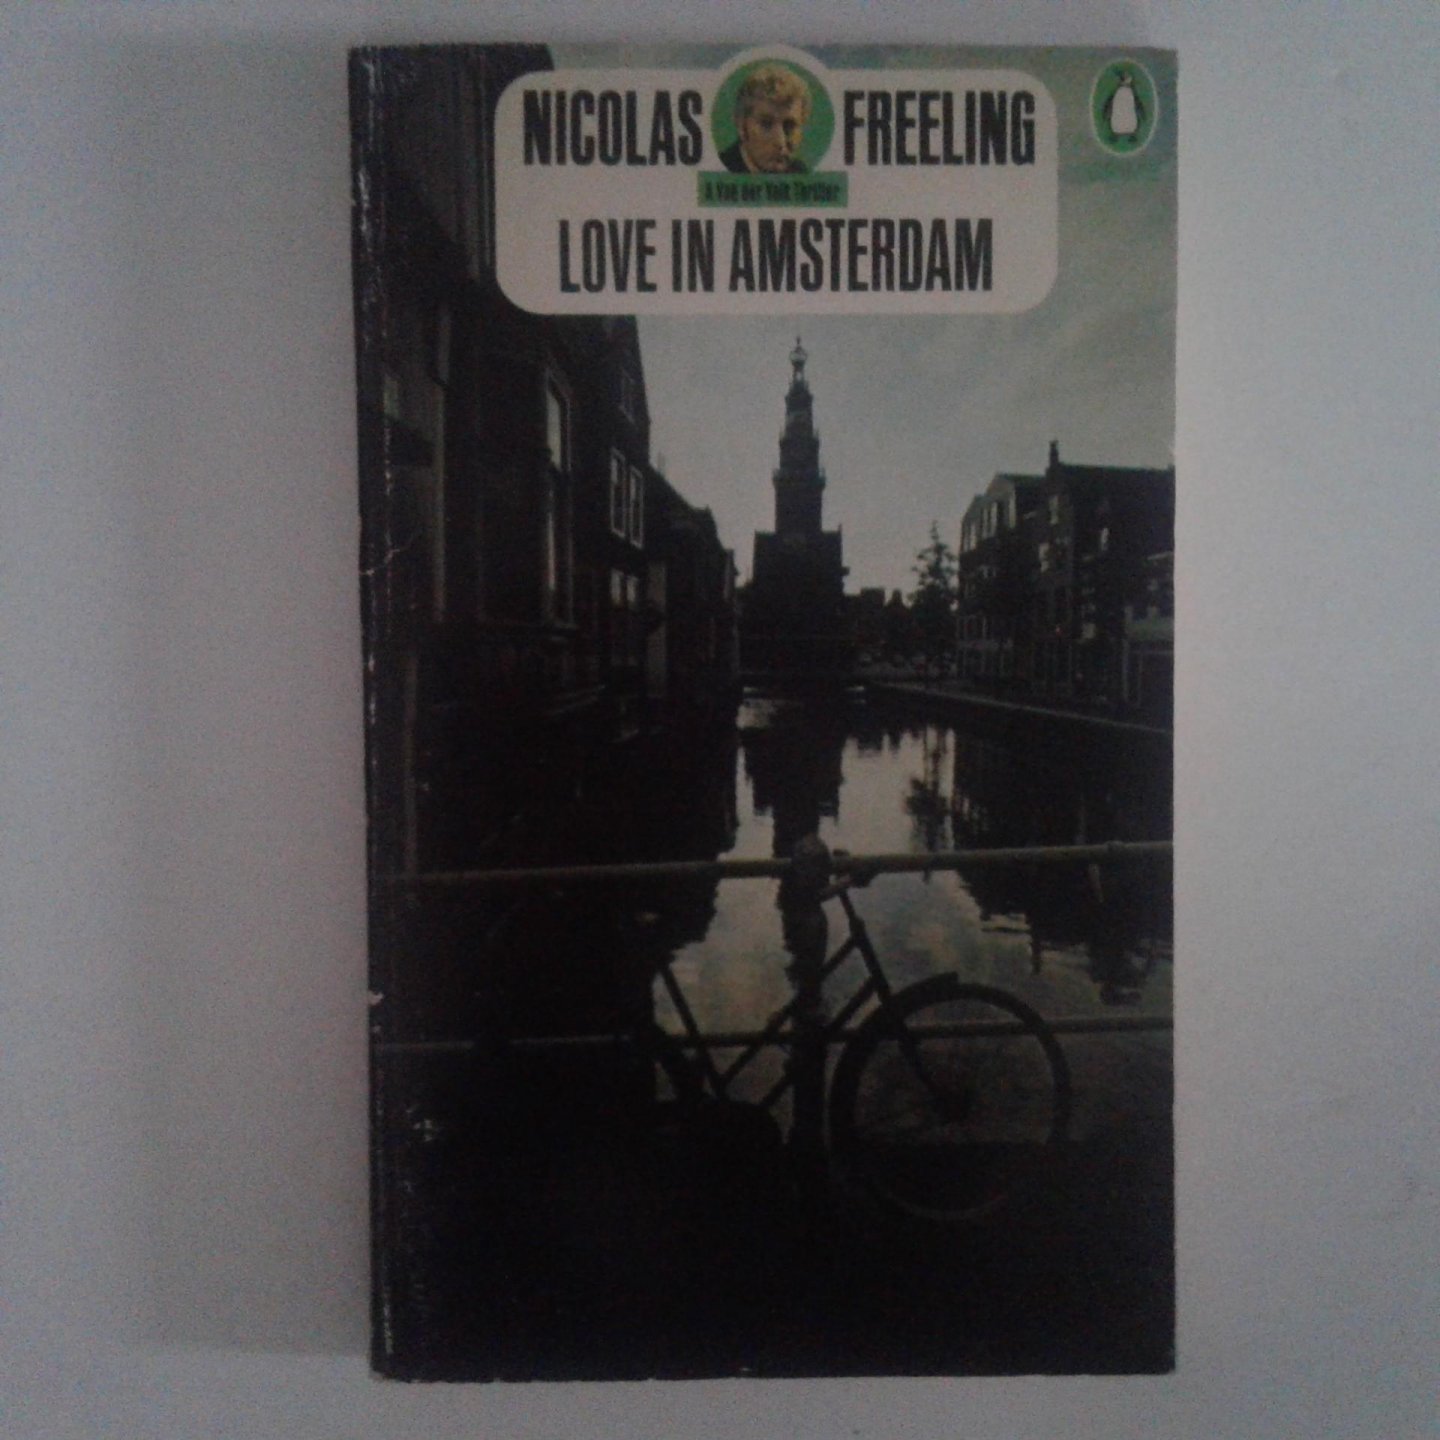 Freeling, Nicolas - Aanbieding 2 titels ; Love in Amsterdam ; The King of the Rainy Country